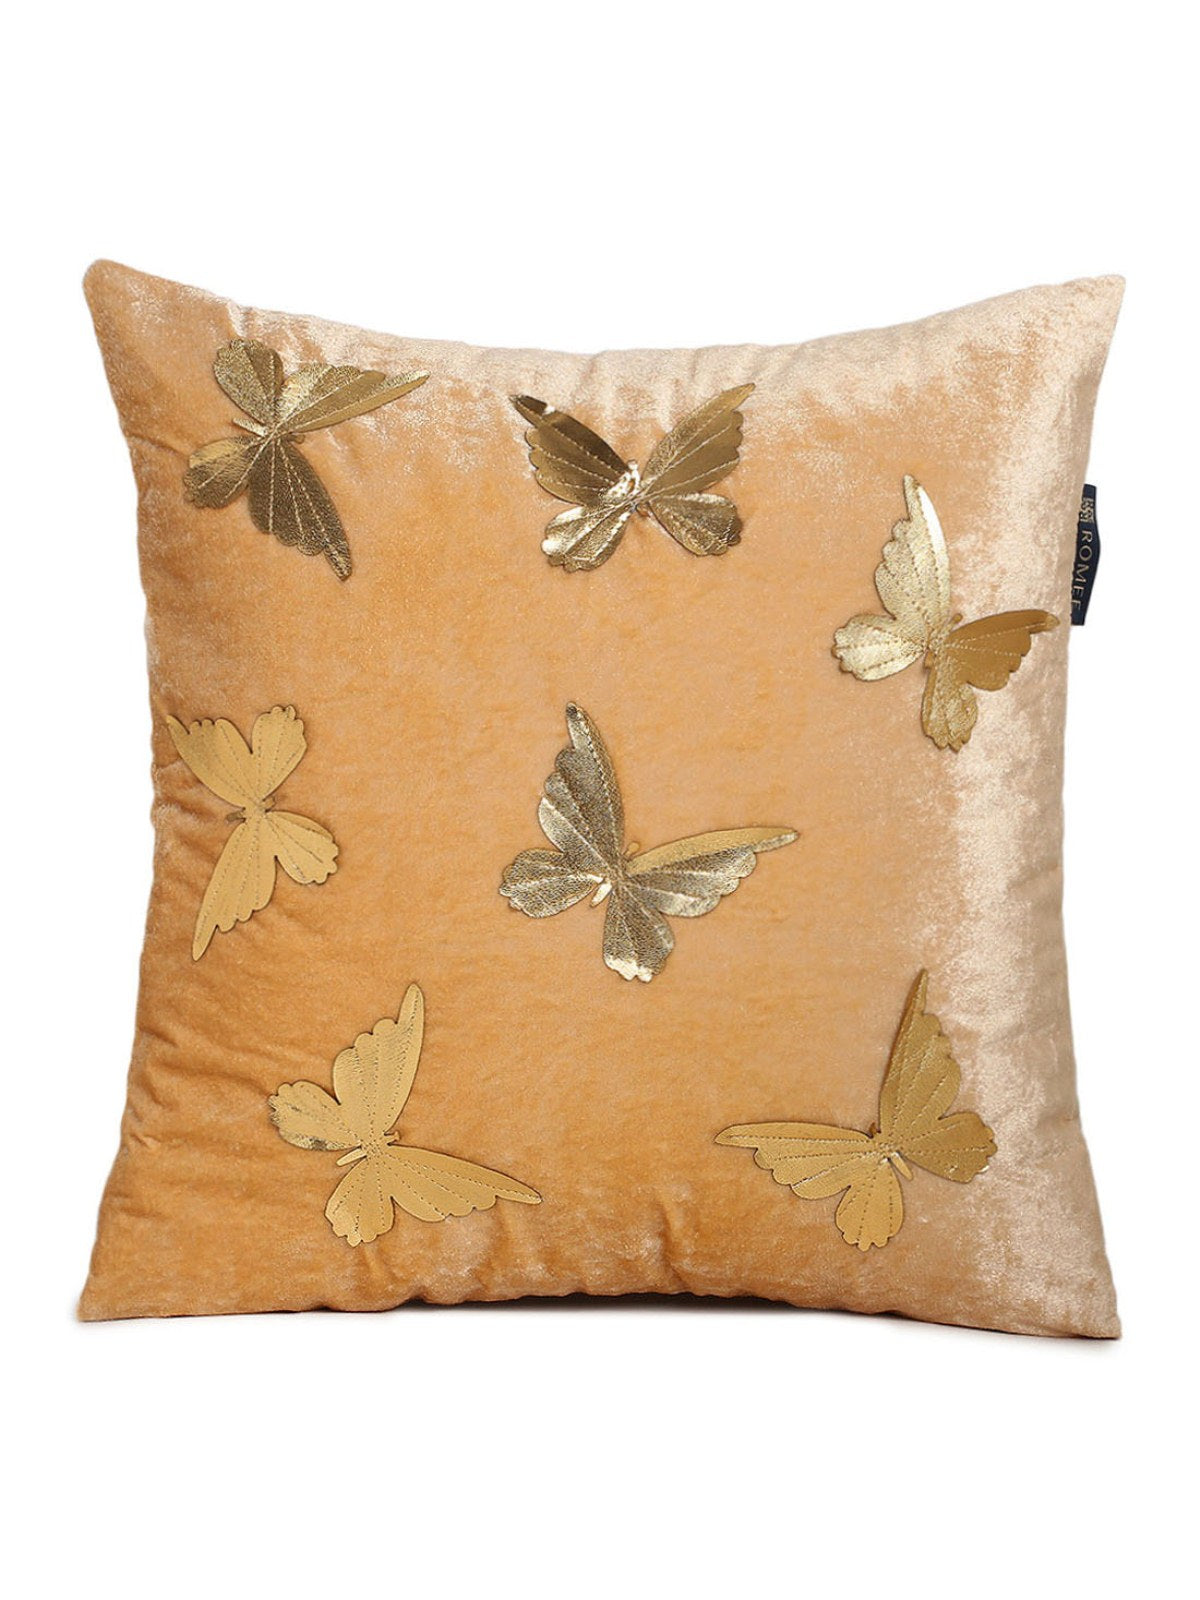 Soft Polyester Velvet Butterfly Patchwork Designer Cushion Covers 16x16 inches, Set of 5 - Beige